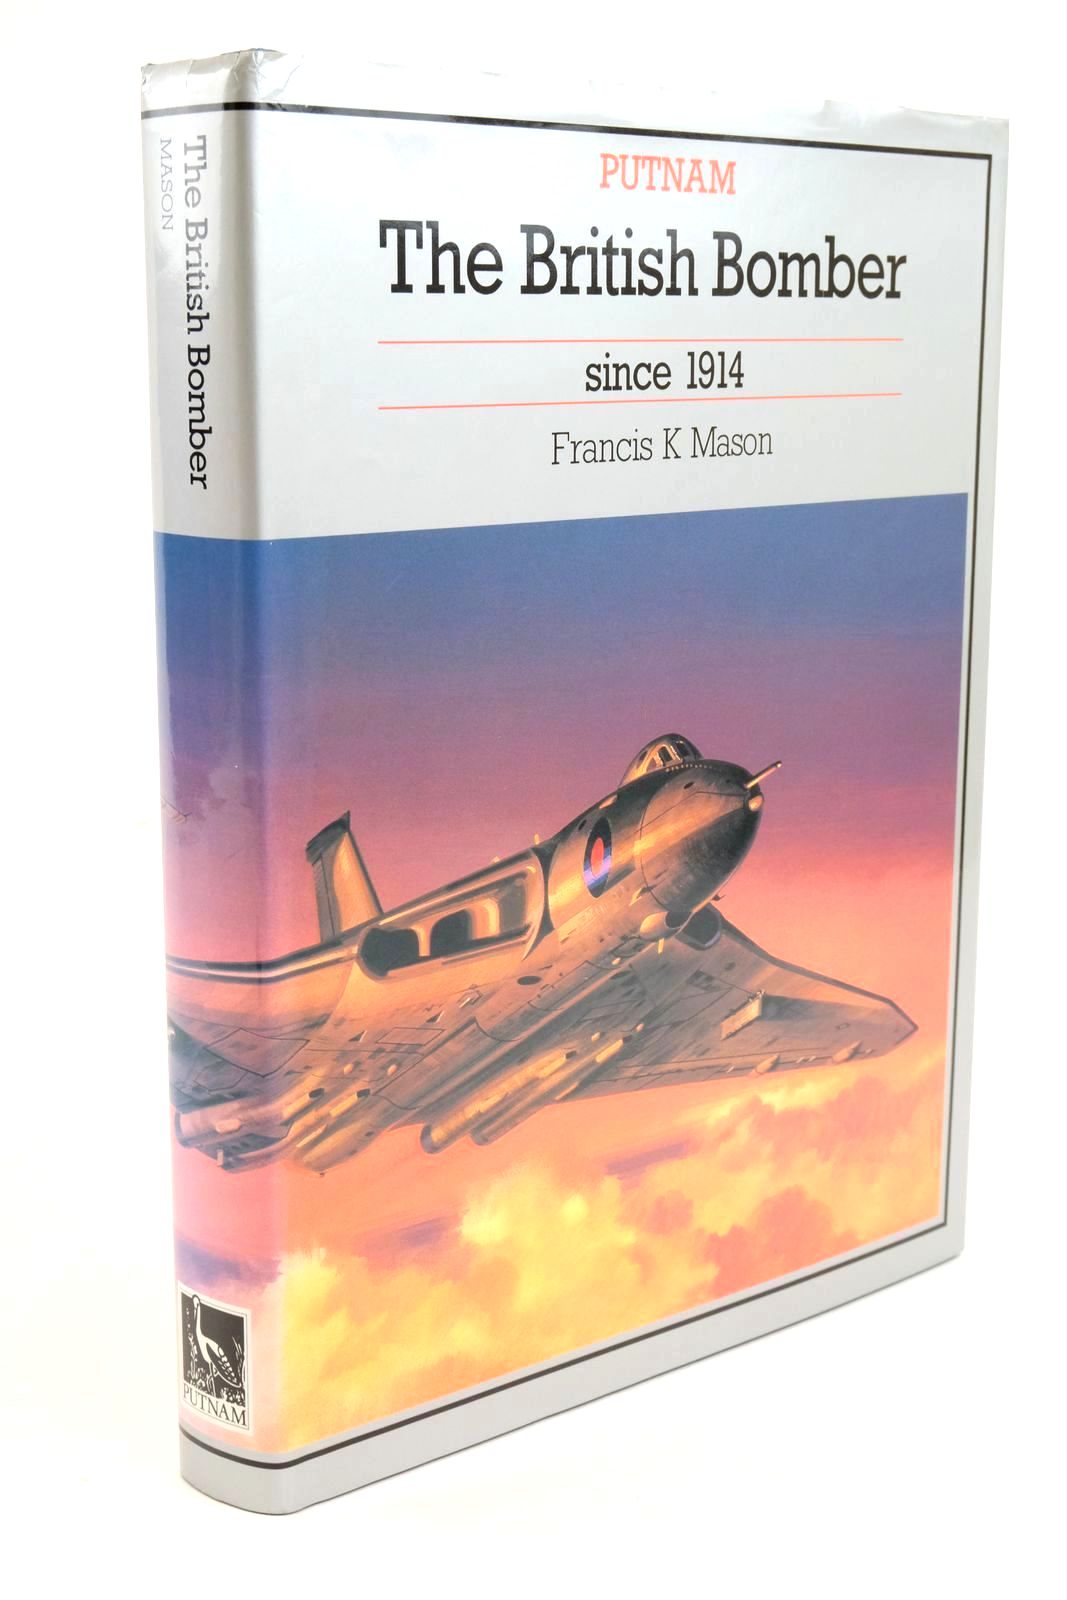 Photo of THE BRITISH BOMBER SINCE 1914 written by Mason, Francis K. published by Putnam Aeronautical Books (STOCK CODE: 1322047)  for sale by Stella & Rose's Books